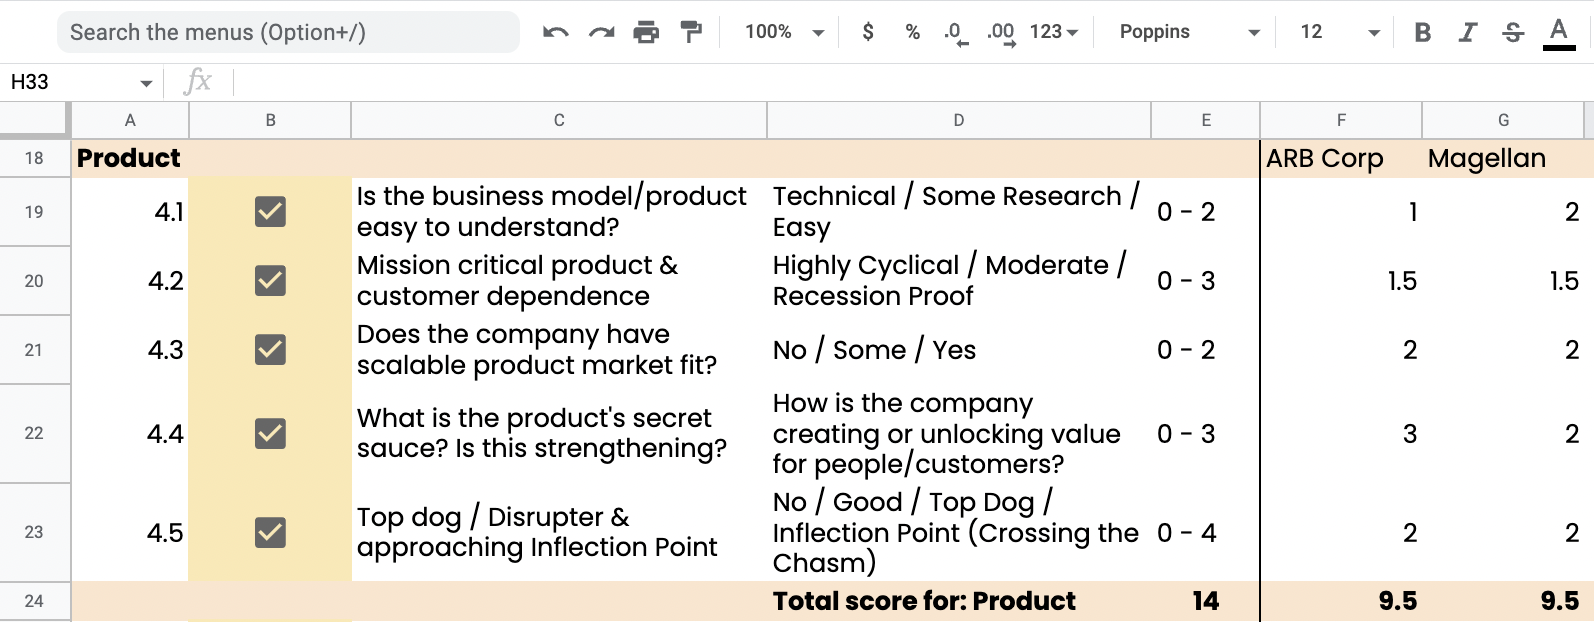 rask investment checklist example showing screenshot of product questions